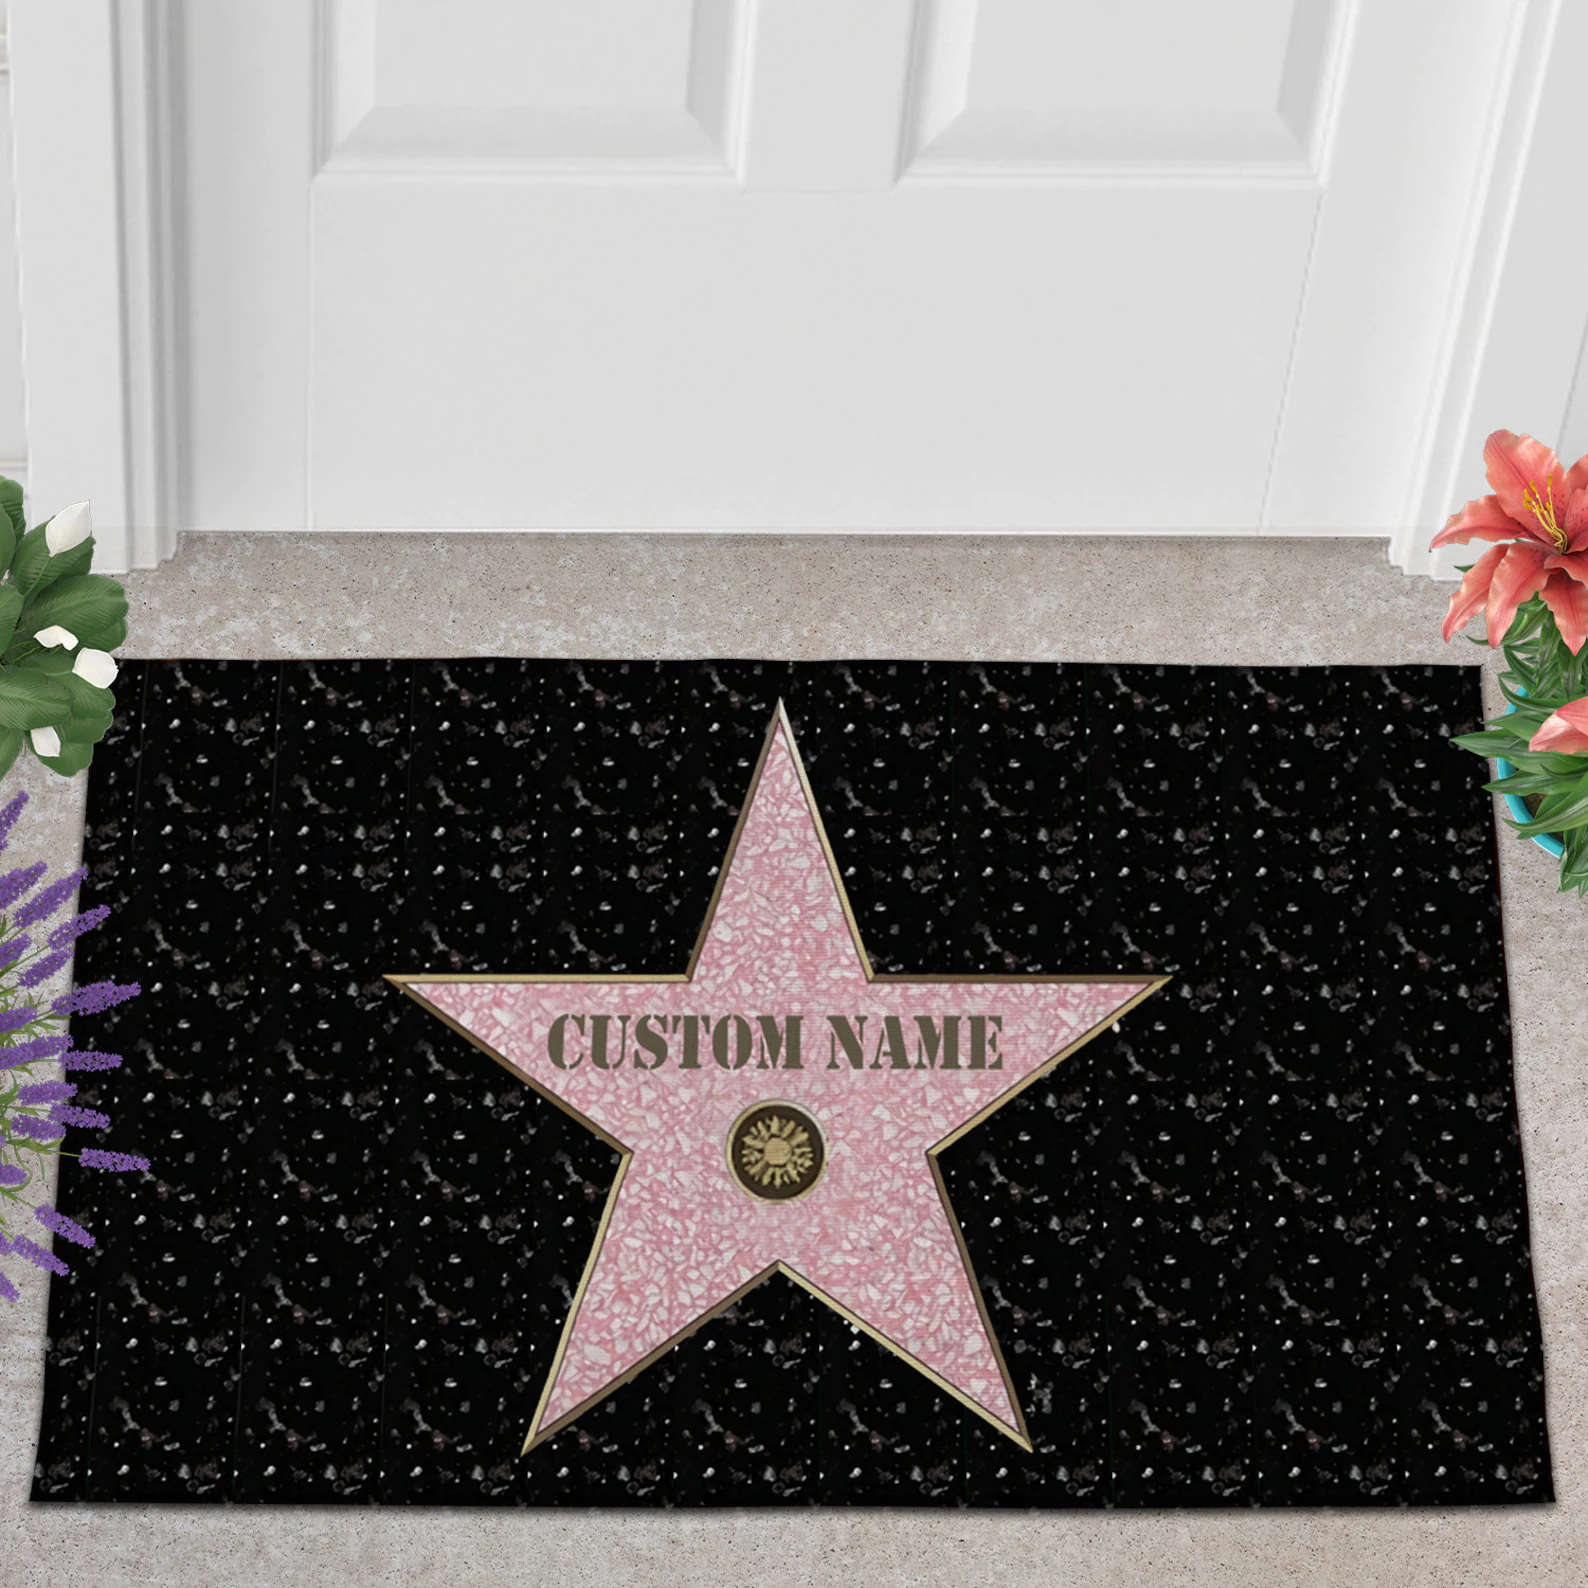 Personalized Hollywood Star Doormat